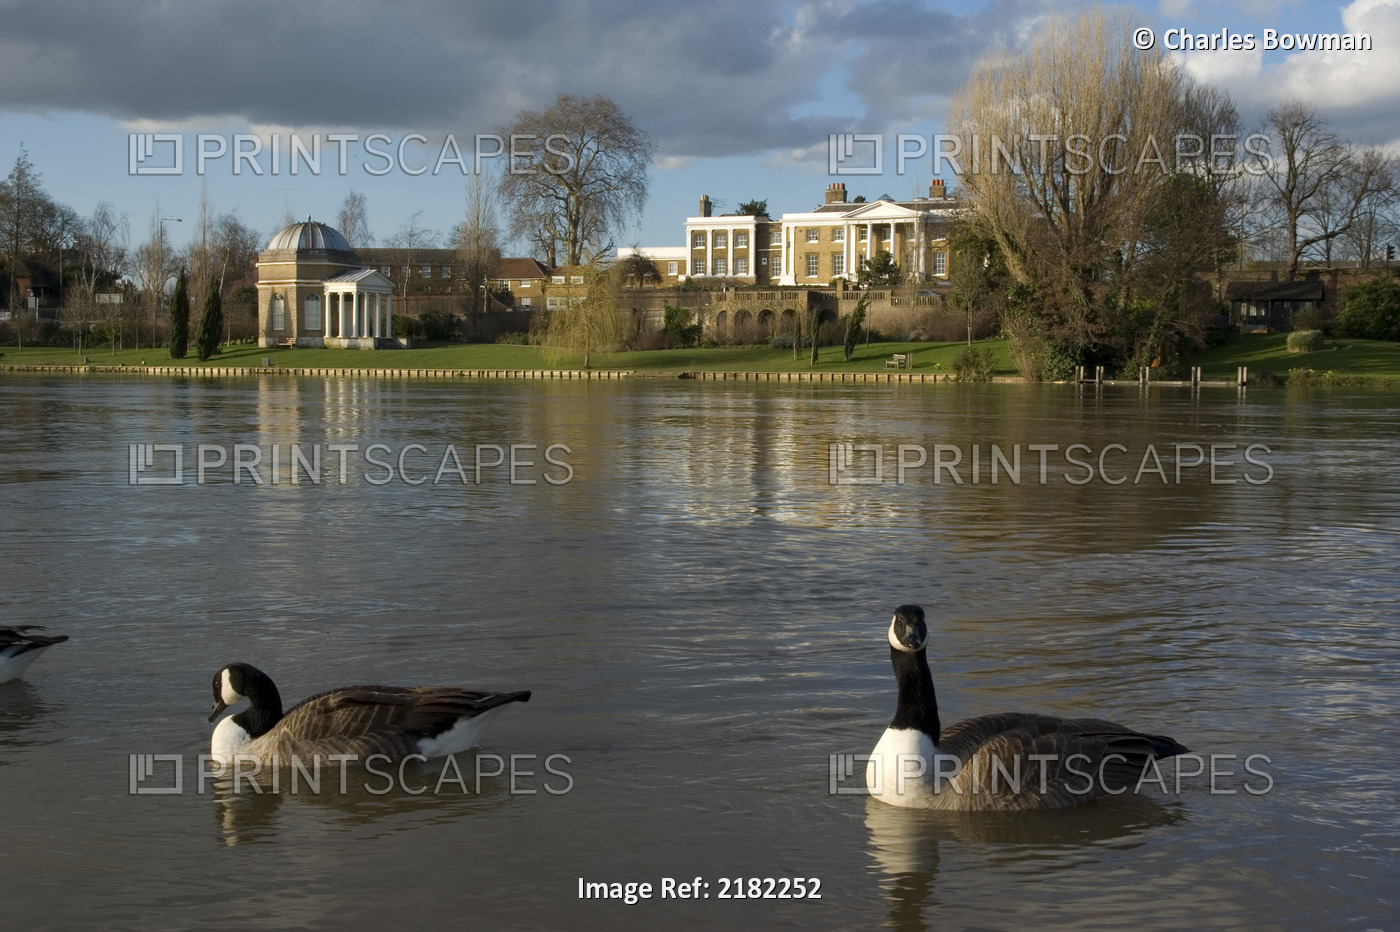 Europe, Uk, England, Surrey, Molesey, River Thames With Geese